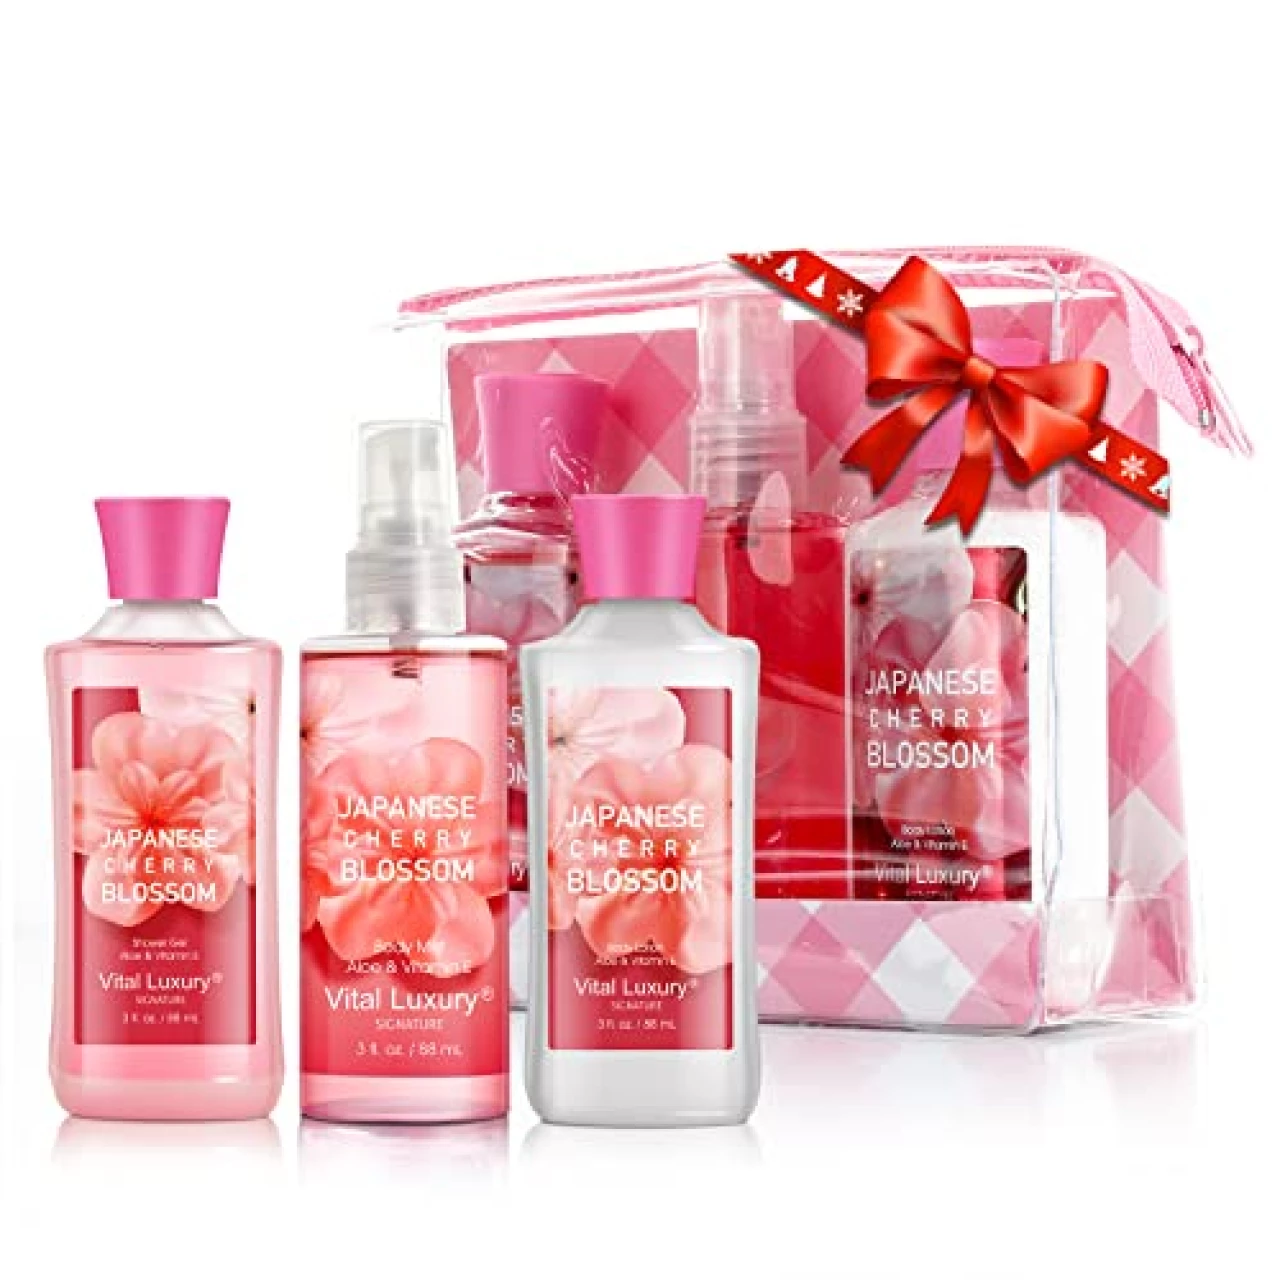 Vital Luxury Bath &amp; Body Care Travel Set - Home Spa Set with Body Lotion, Shower Gel and Fragrance Mist